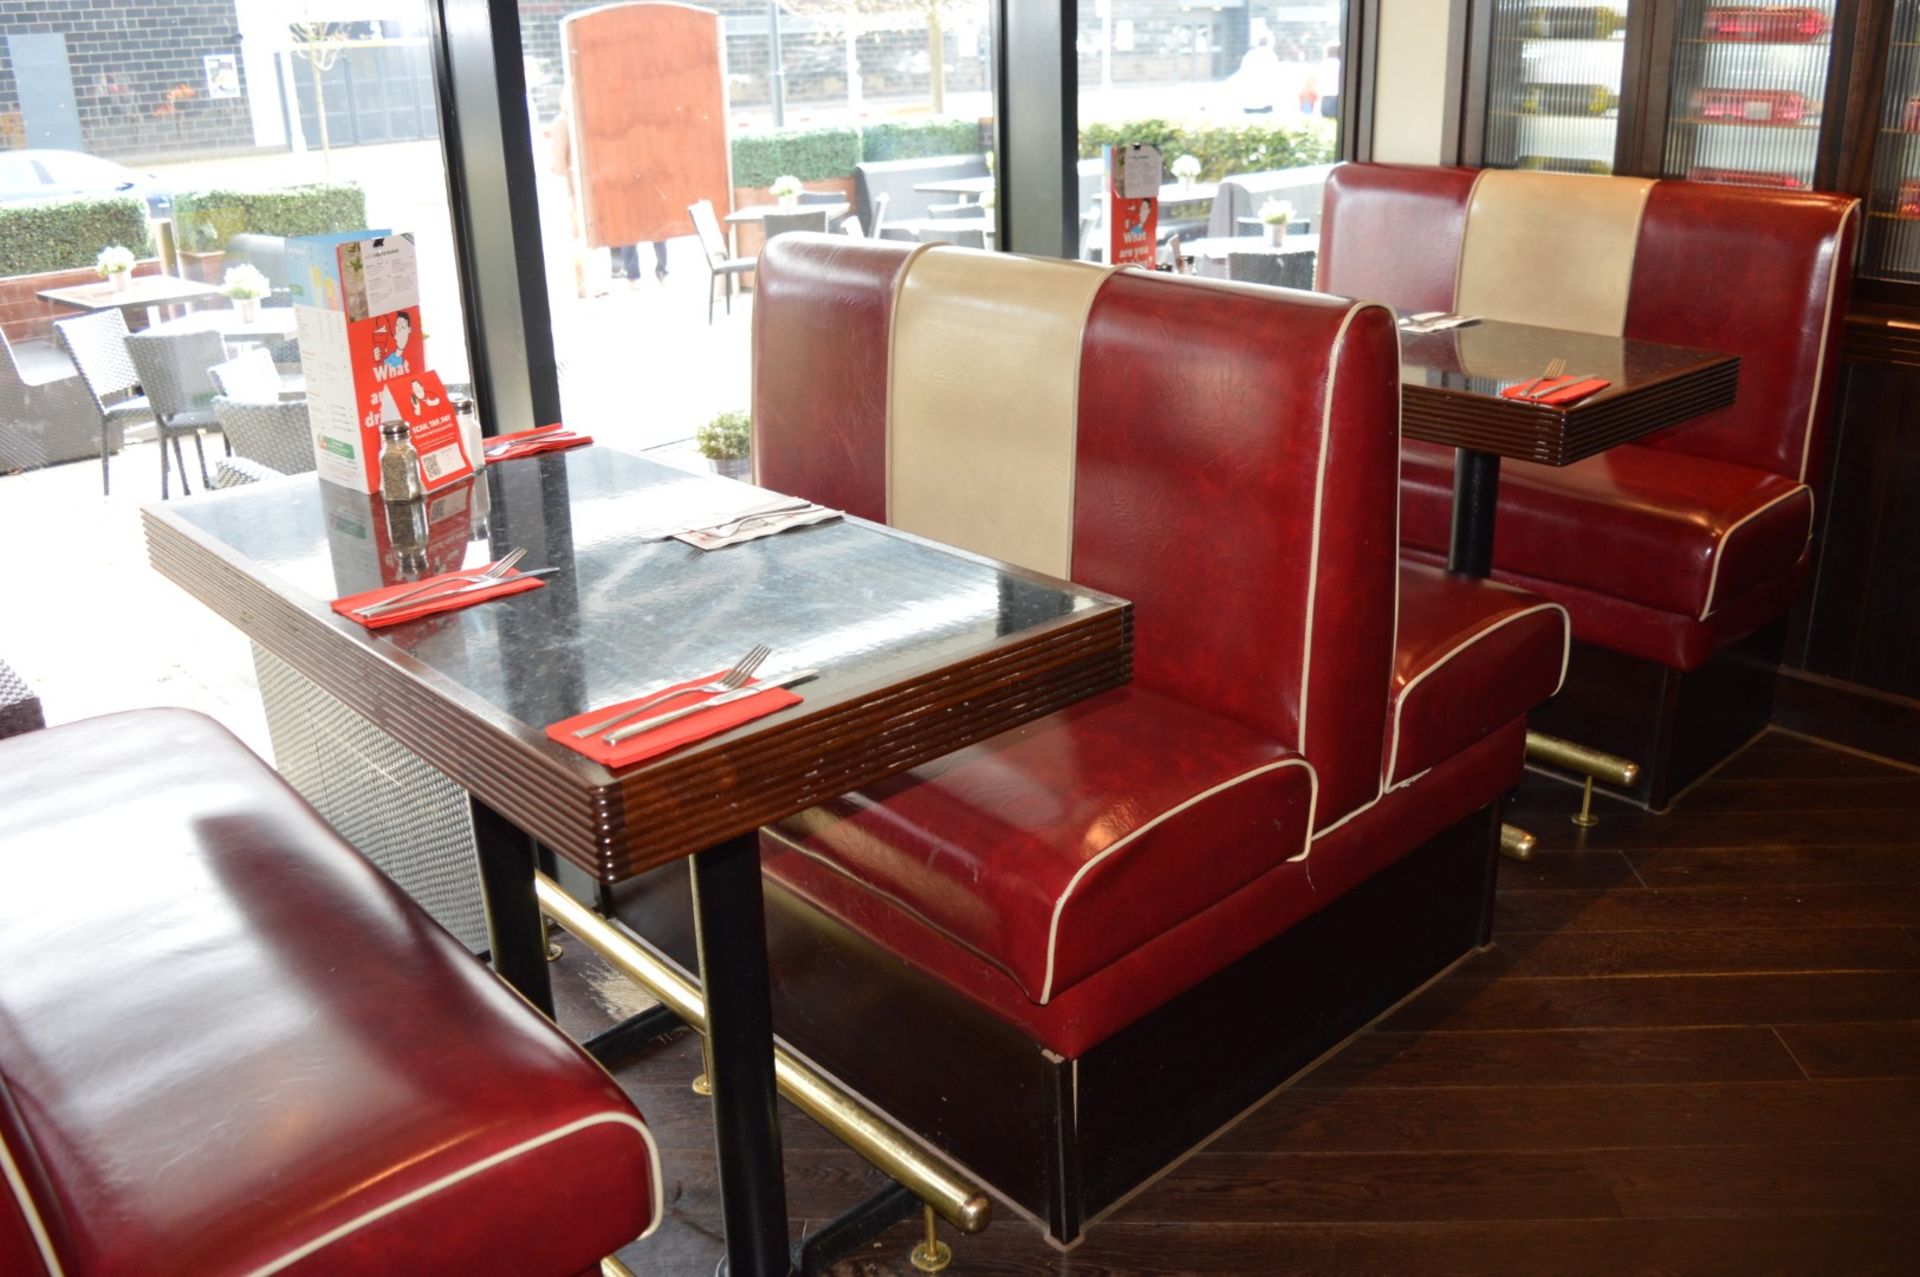 2 x Rectangular Restaurant / Bistro Tables - Each Features A Wood Framed Top And Metal Base - - Image 4 of 4